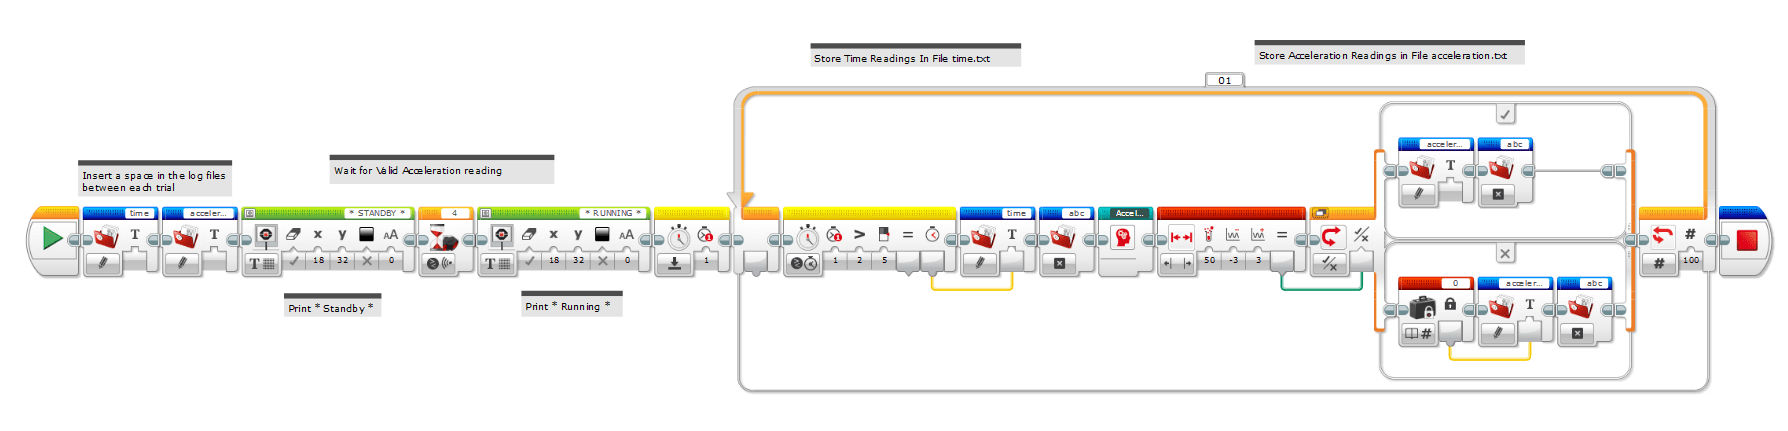 A screen capture image shows the EV3 MINDSTORMS program used to program the mouse trap racer - a sequence of icons.